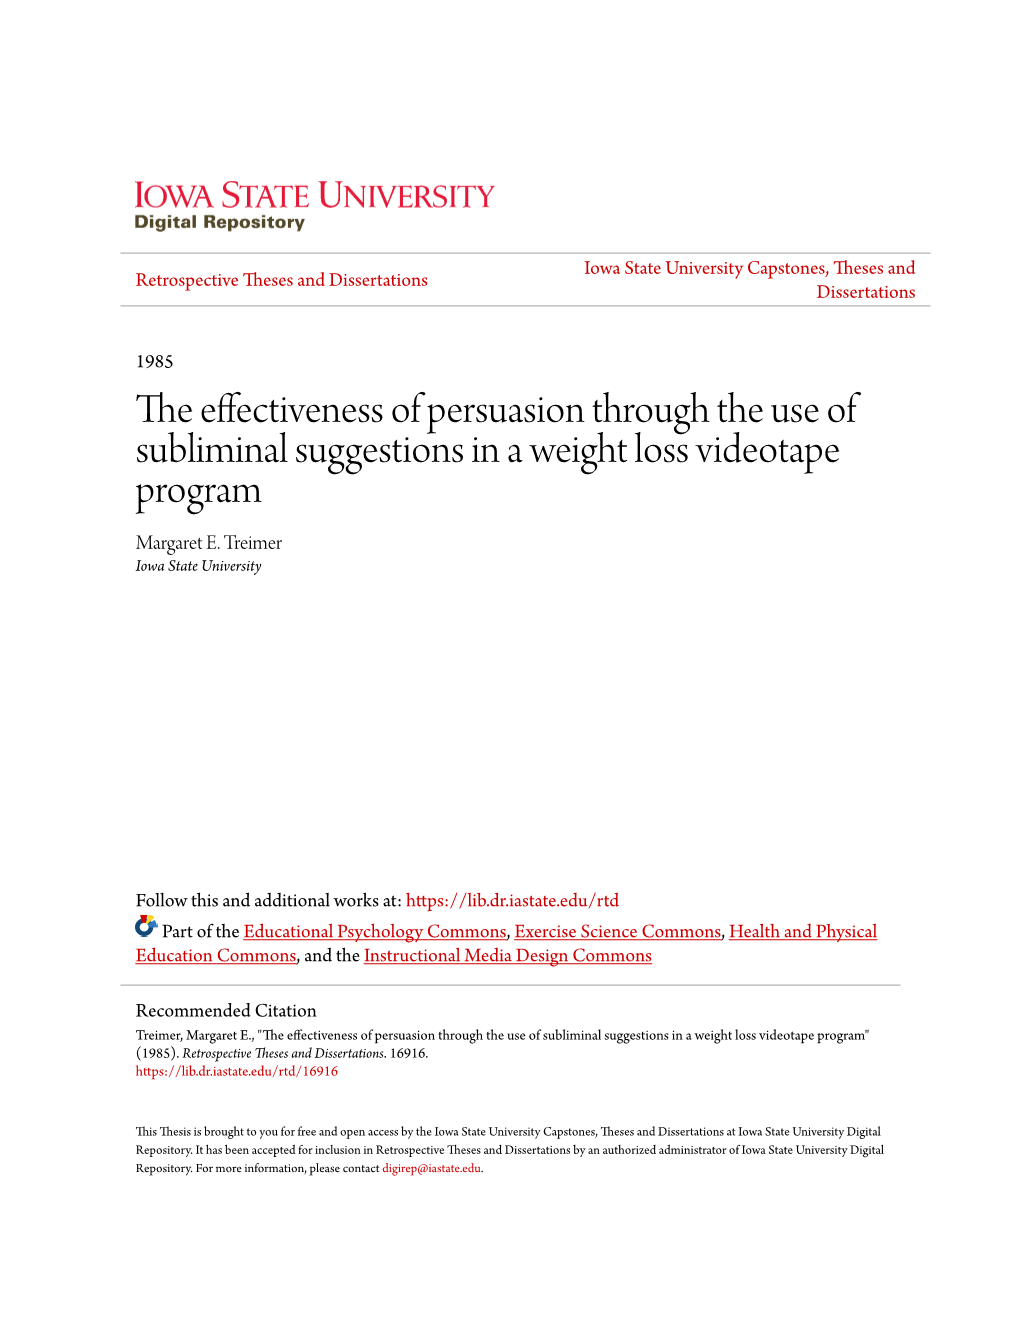 The Effectiveness of Persuasion Through the Use of Subliminal Suggestions in a Weight Loss Videotape Program Margaret E